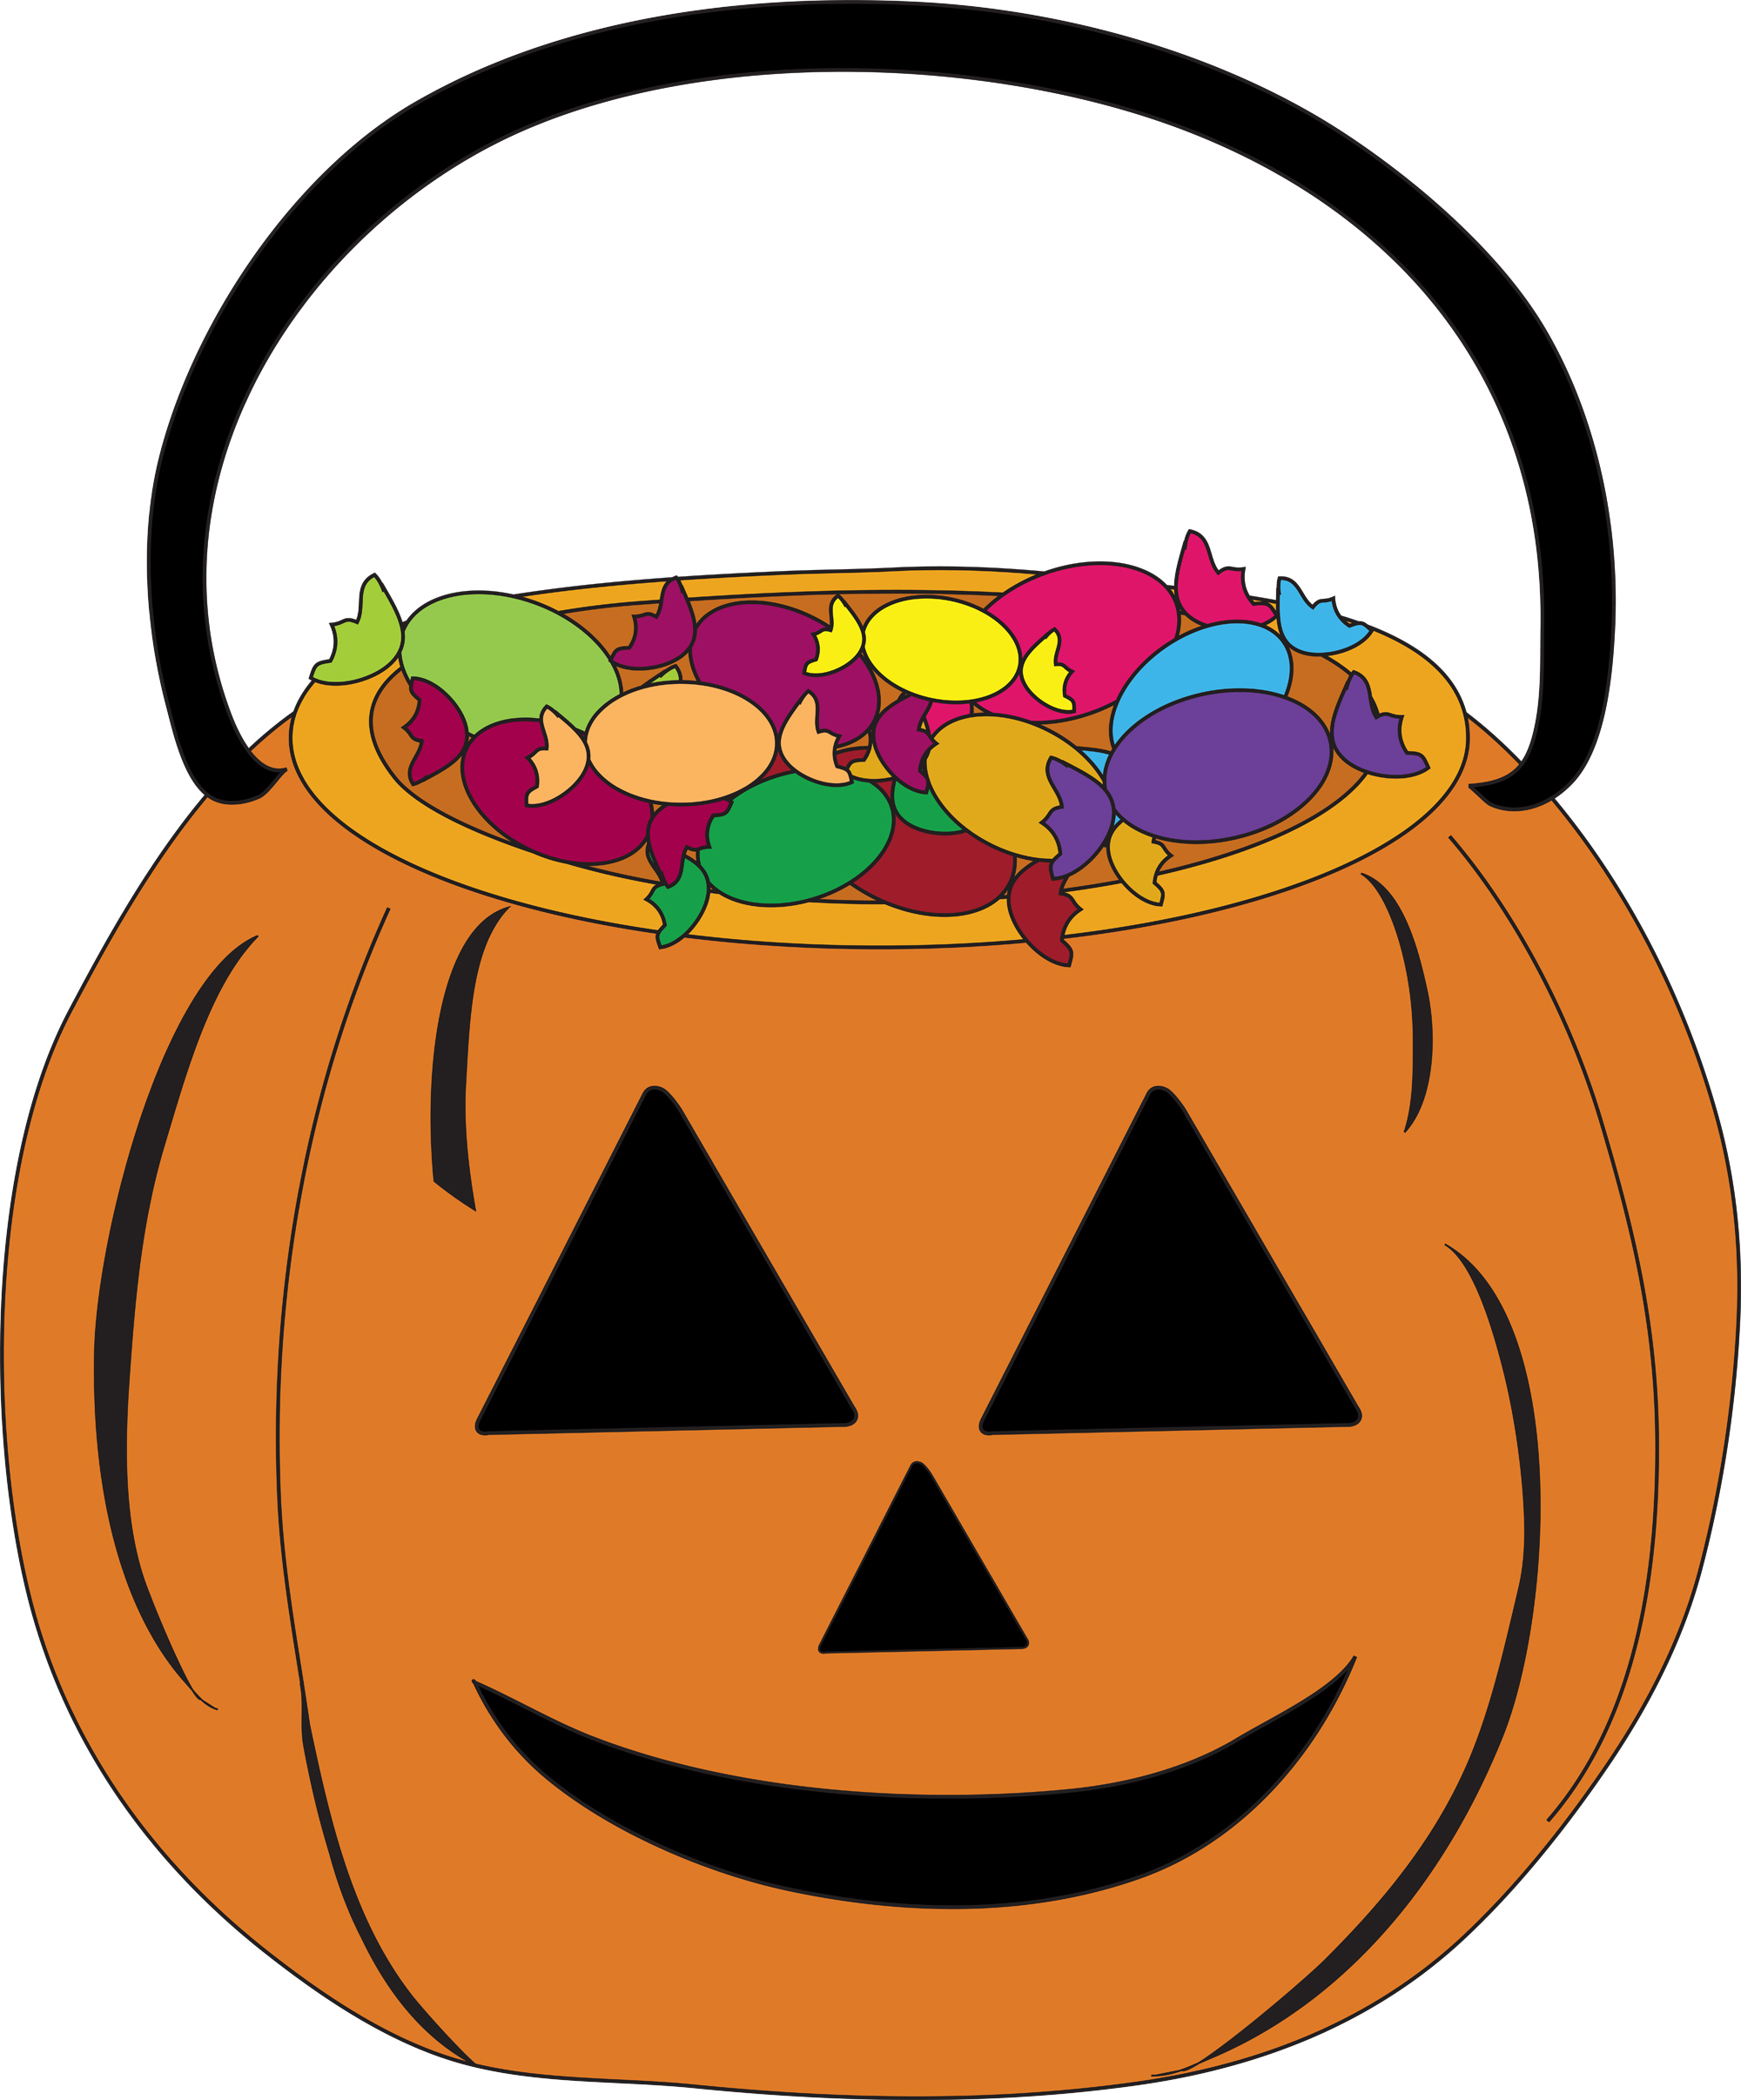 Halloween candy clipart free clipart images clipartix